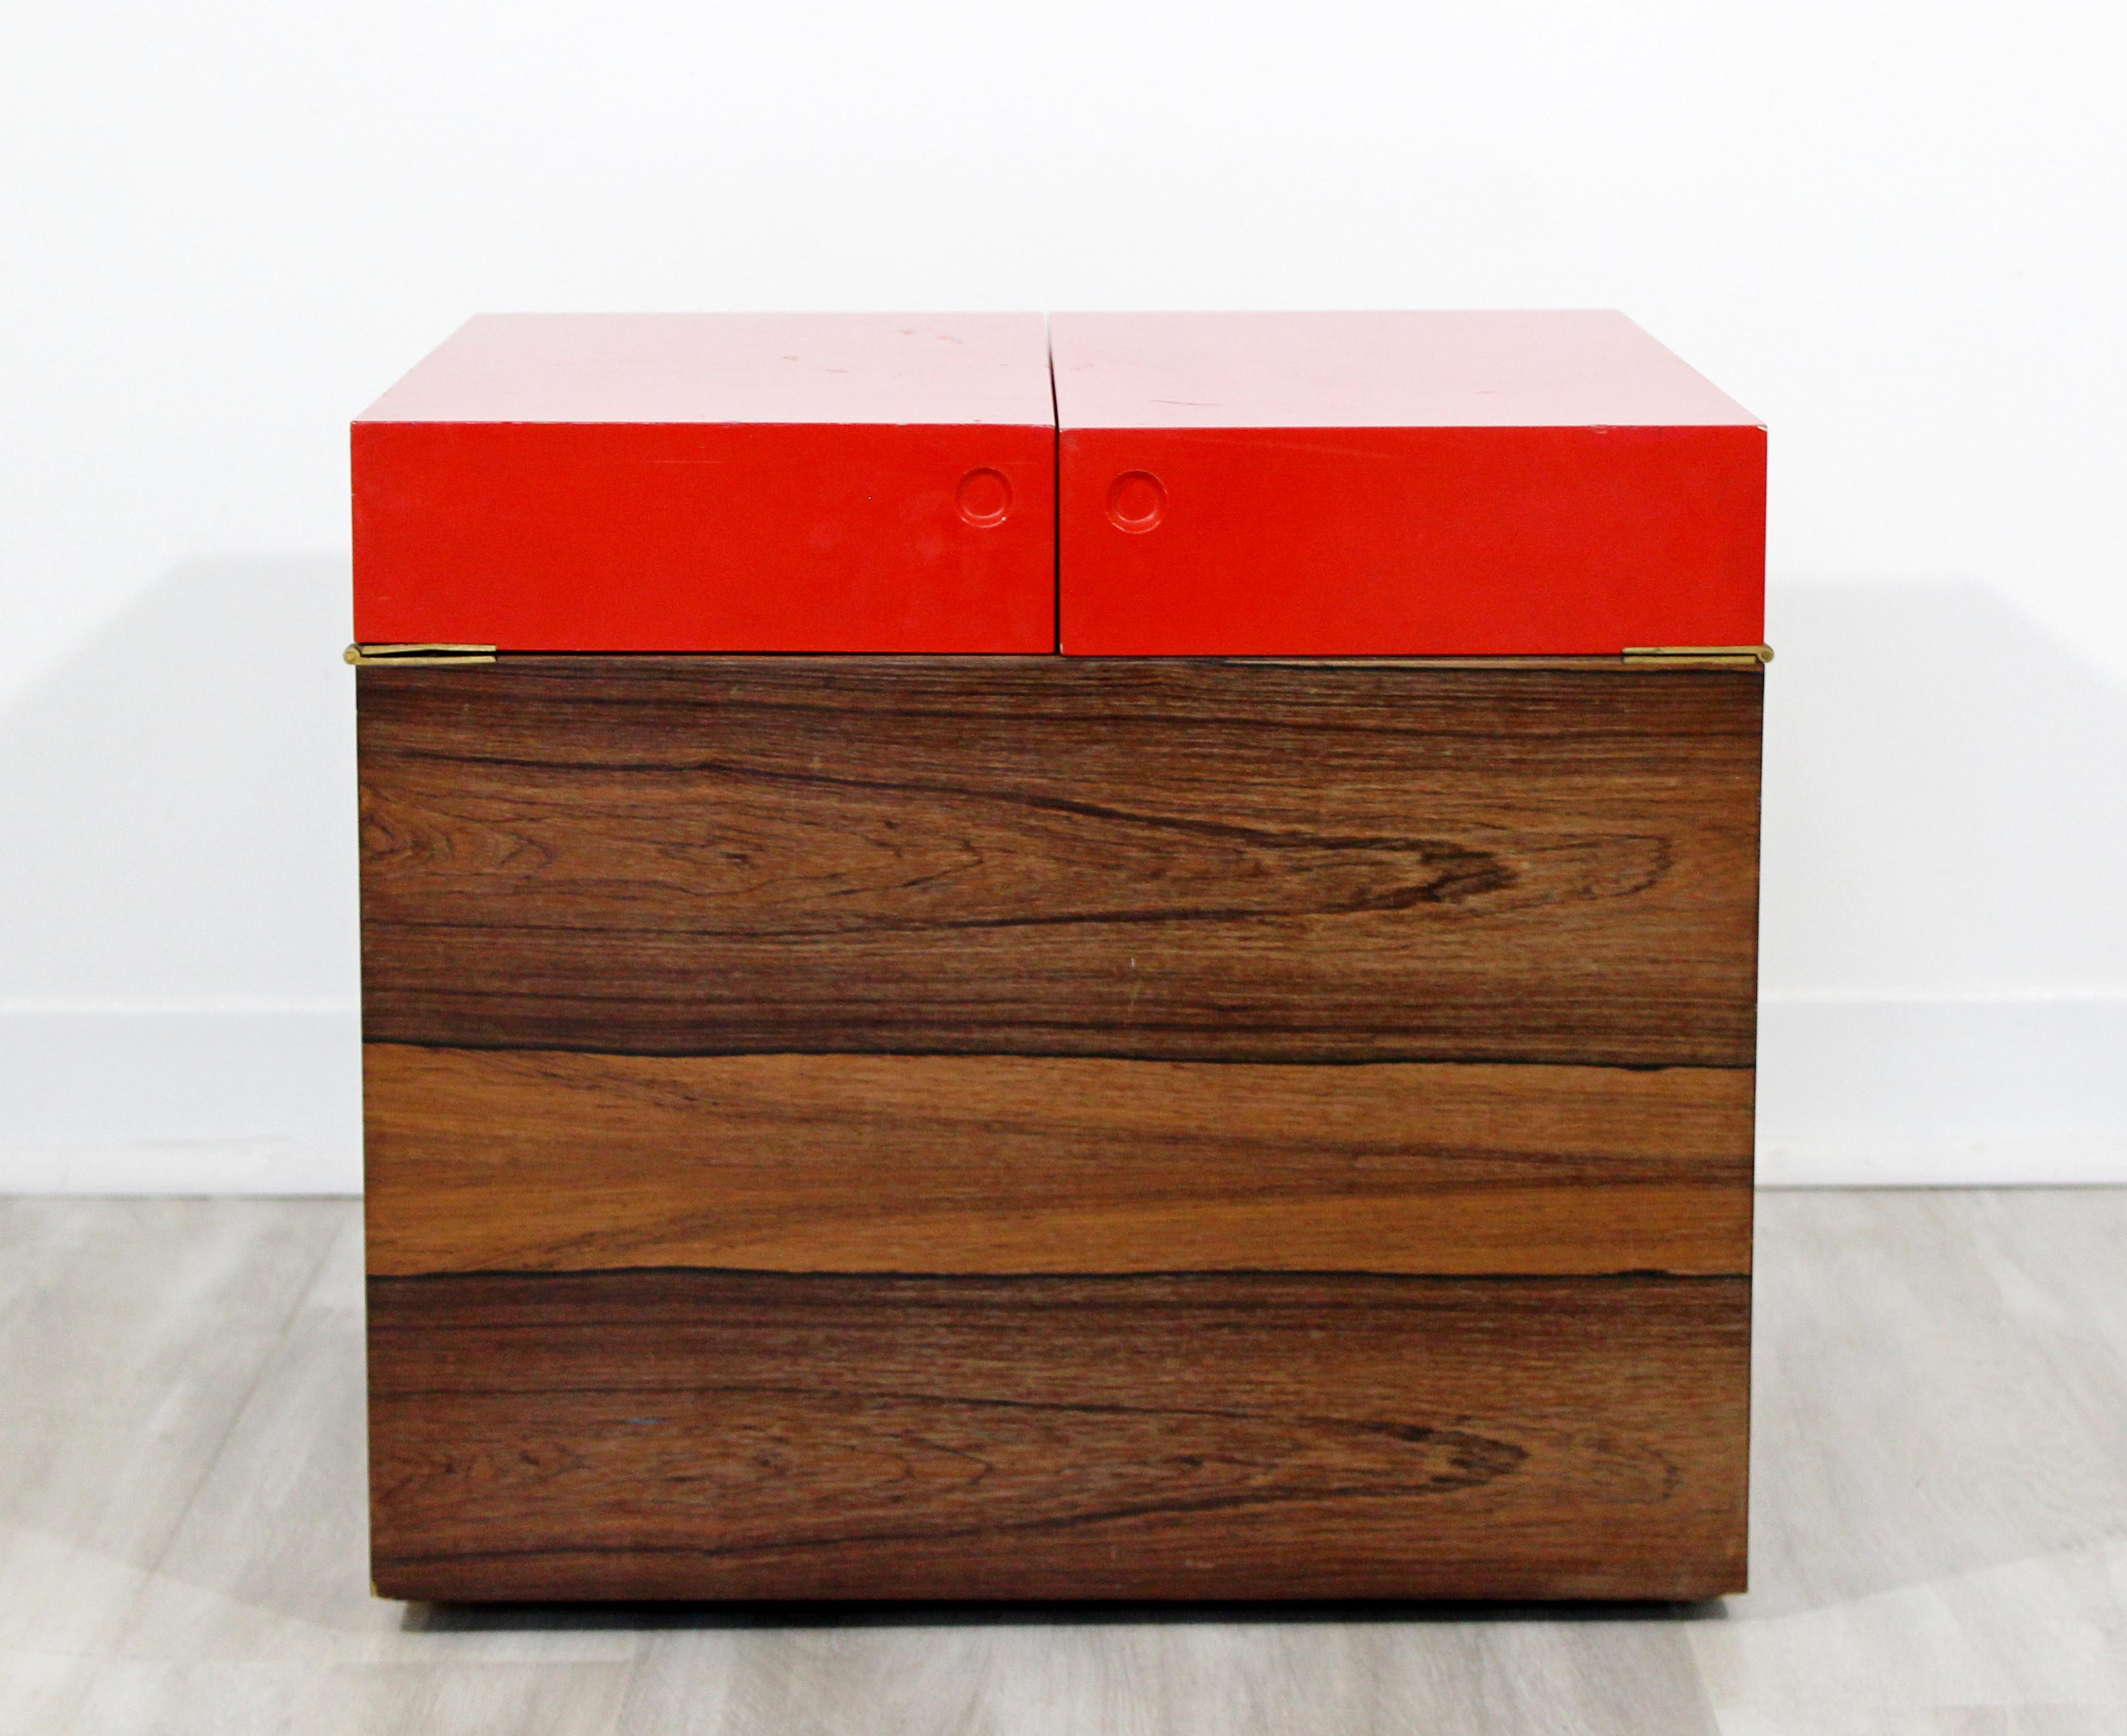 For your consideration is a fantastic, cube mini bar, made of walnut and with a red top, on casters, in the style of Rolf Hesland, circa 1960s. In good vintage condition. The dimensions are 19.75